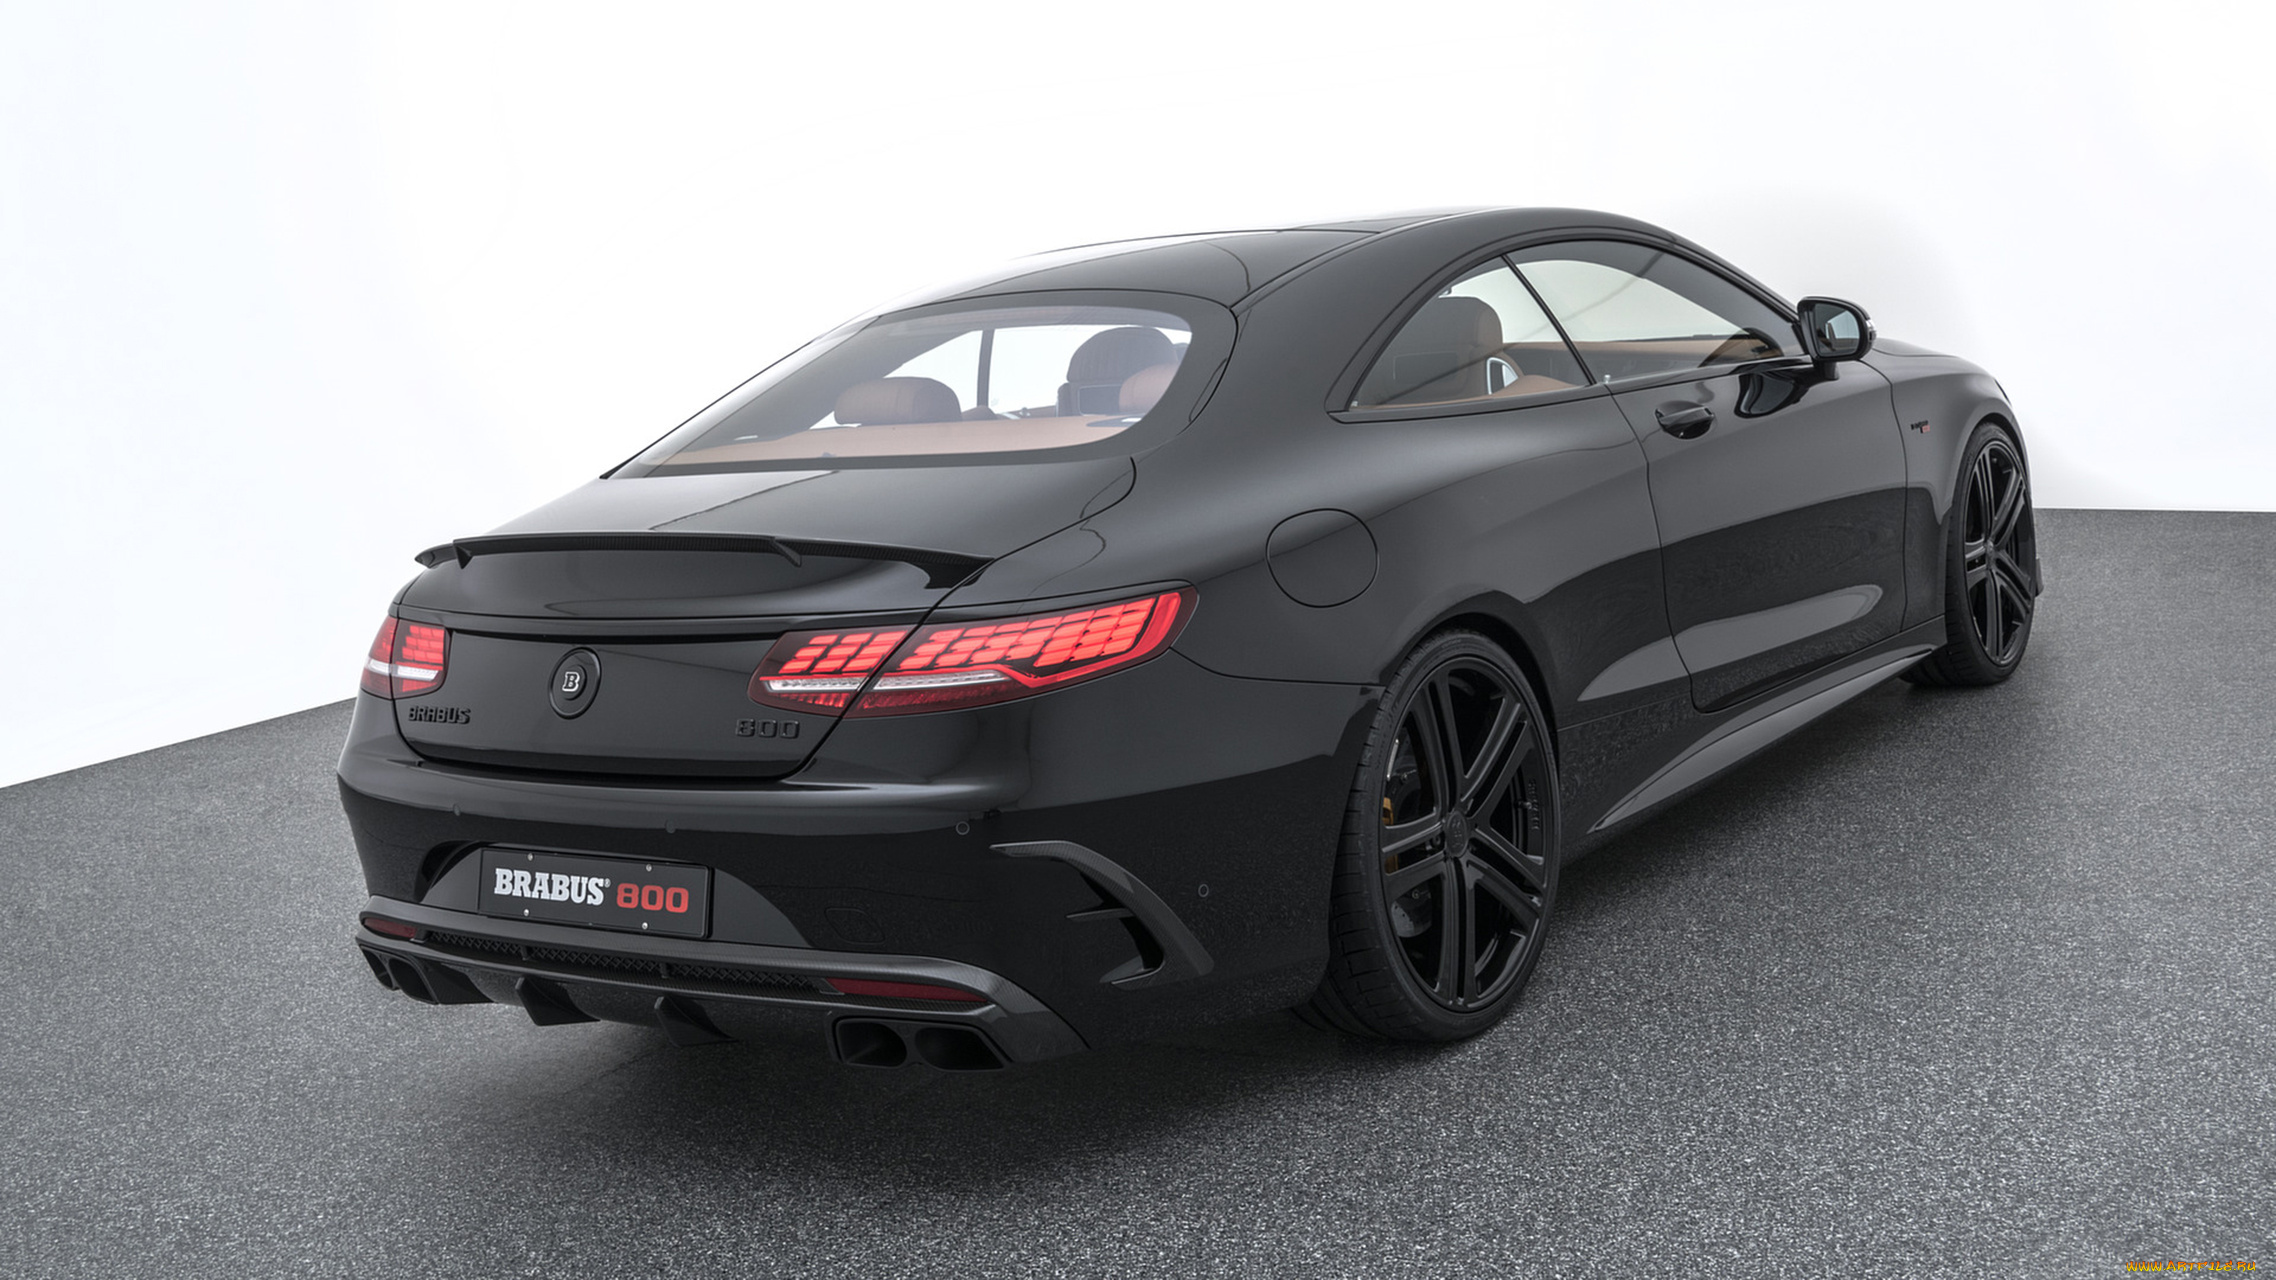 brabus, 800, coupe, based, on, mercedes-benz, amg, s-63, 4matic, coupe, 2018, автомобили, brabus, mercedes-benz, based, 2018, coupe, 800, 4matic, s-63, amg